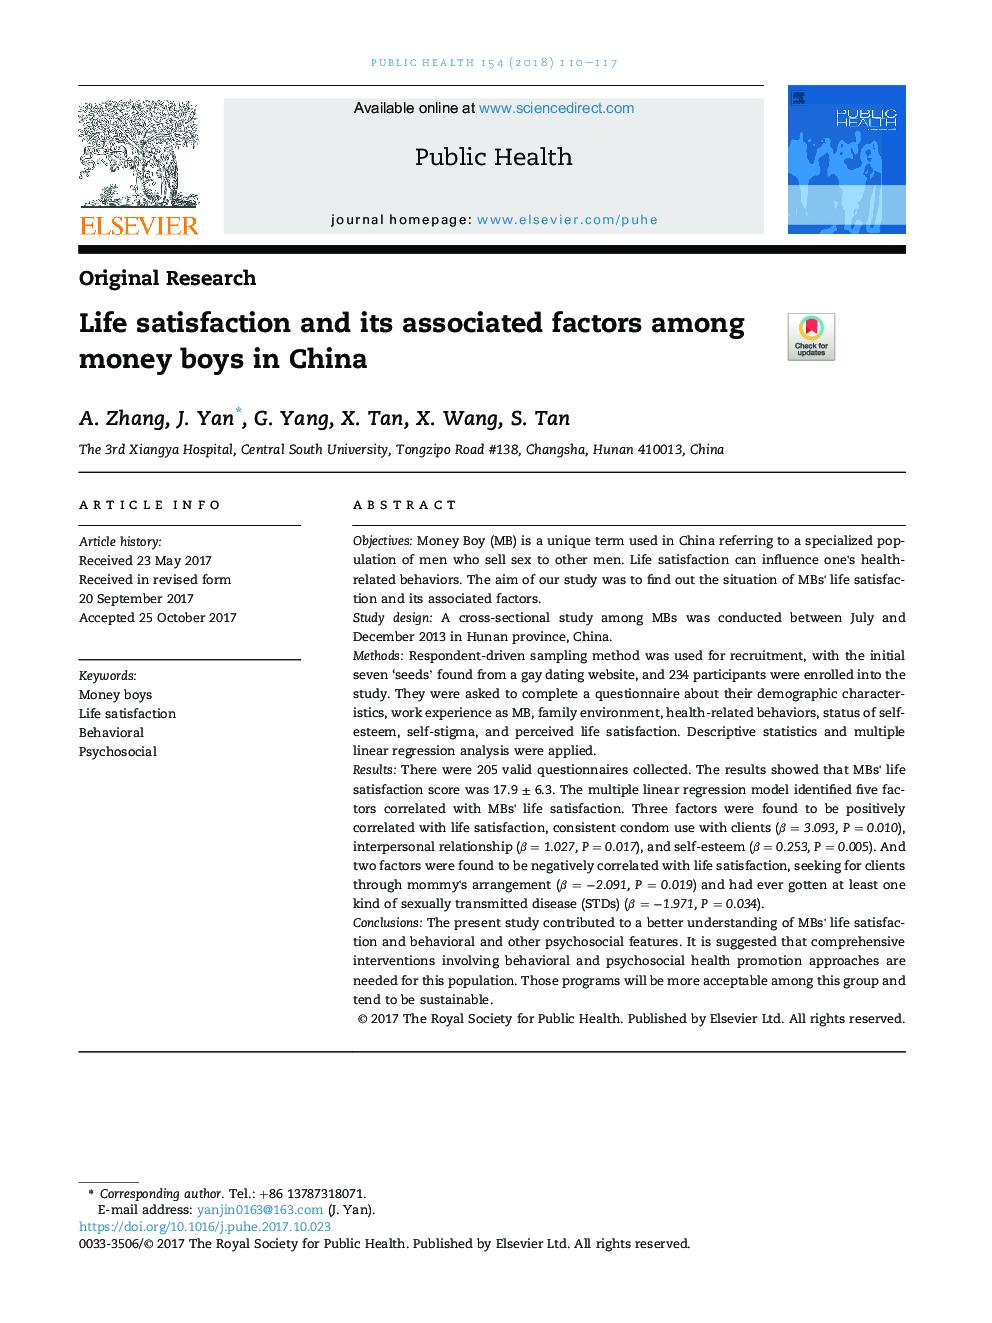 Life satisfaction and its associated factors among money boys in China